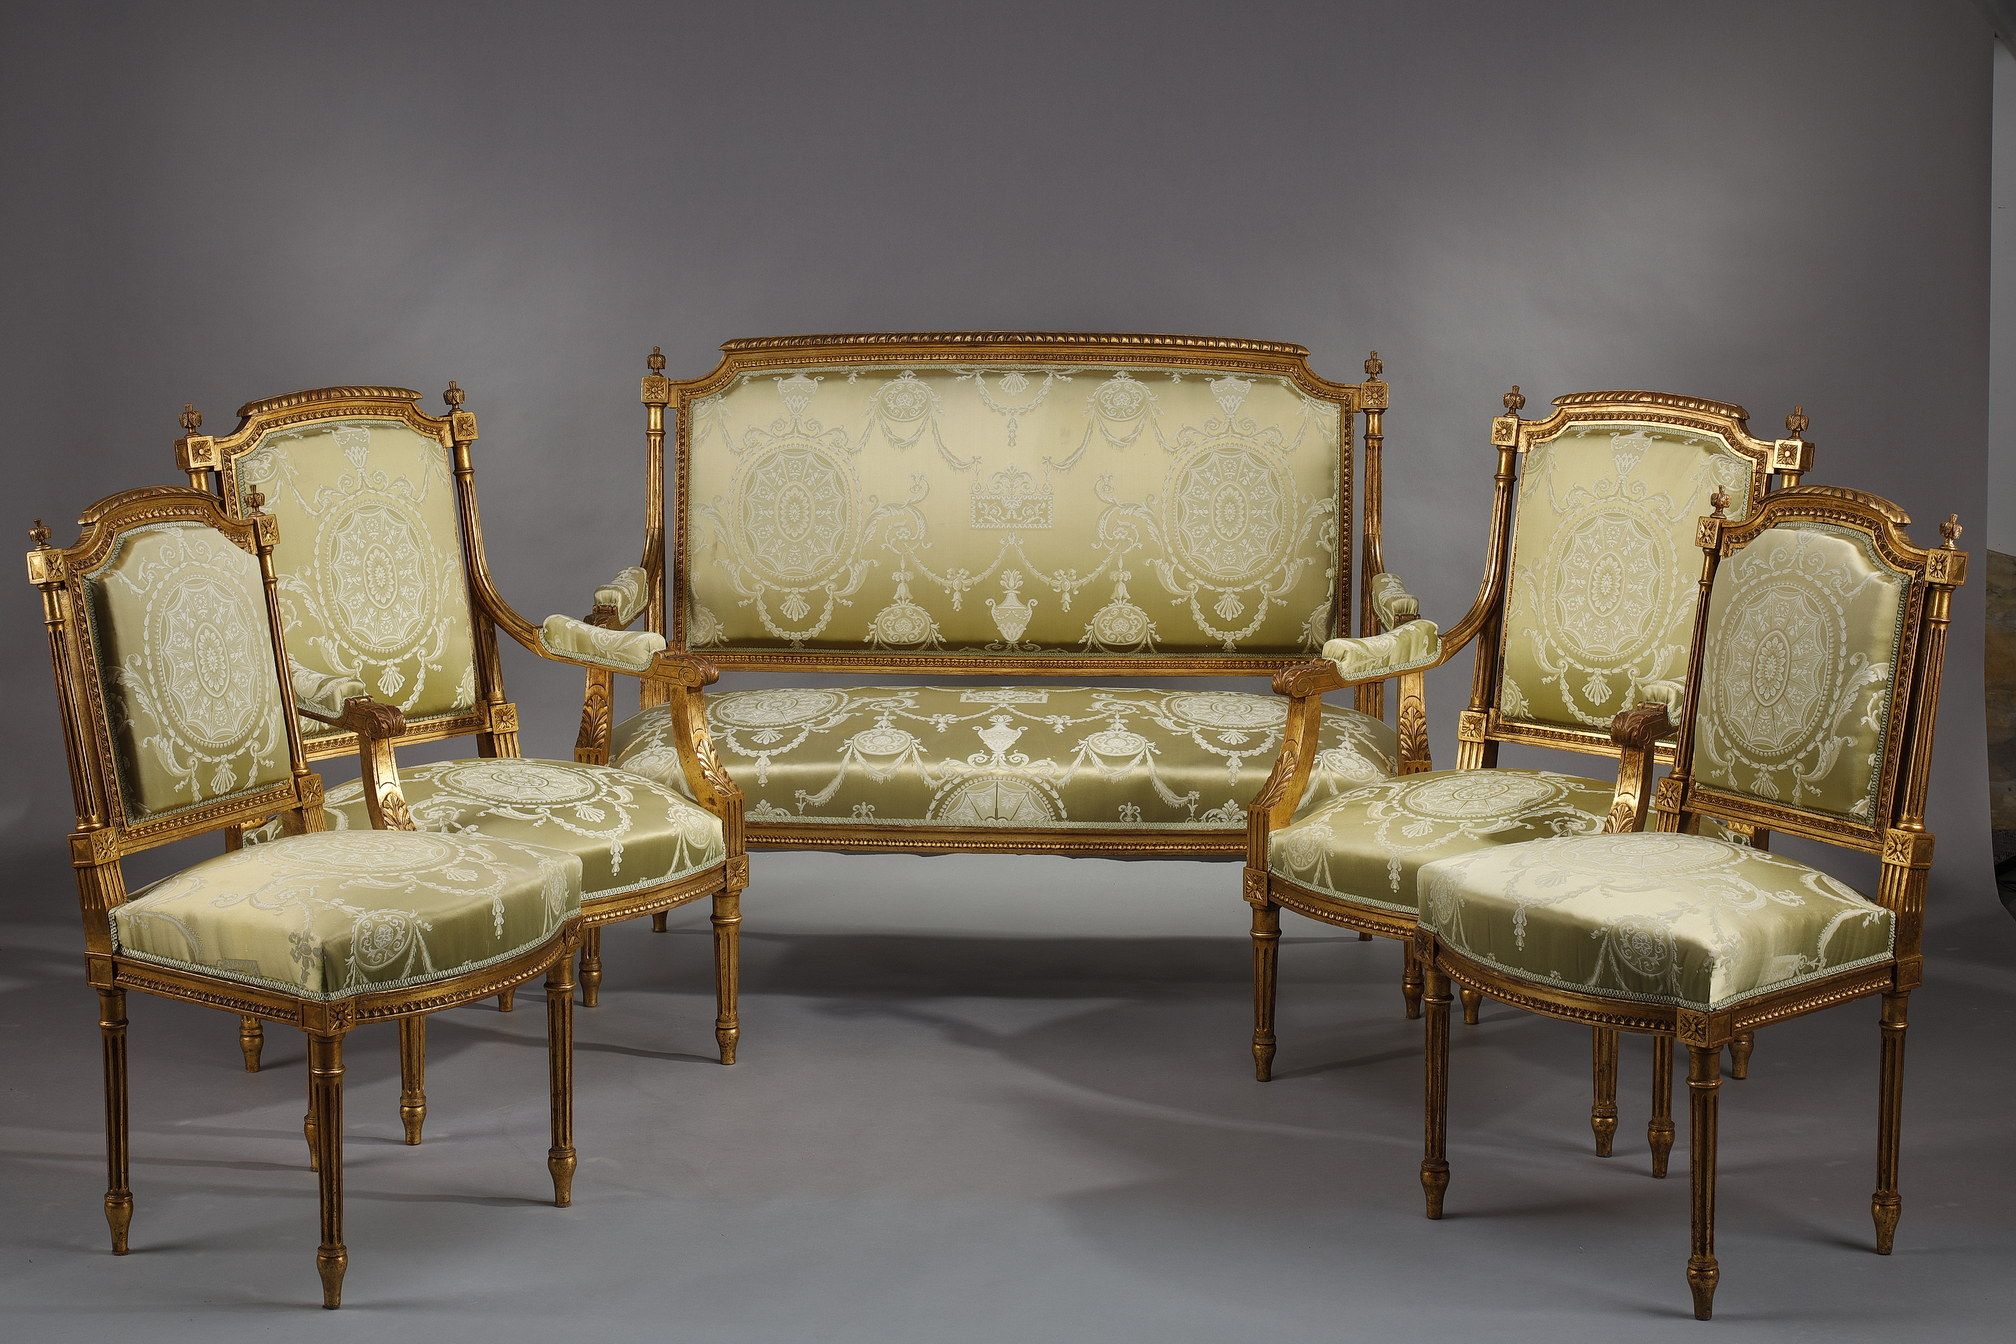 LOUIS XVI-STYLE SALON IN GILDED WOOD AND GREEN SILK 